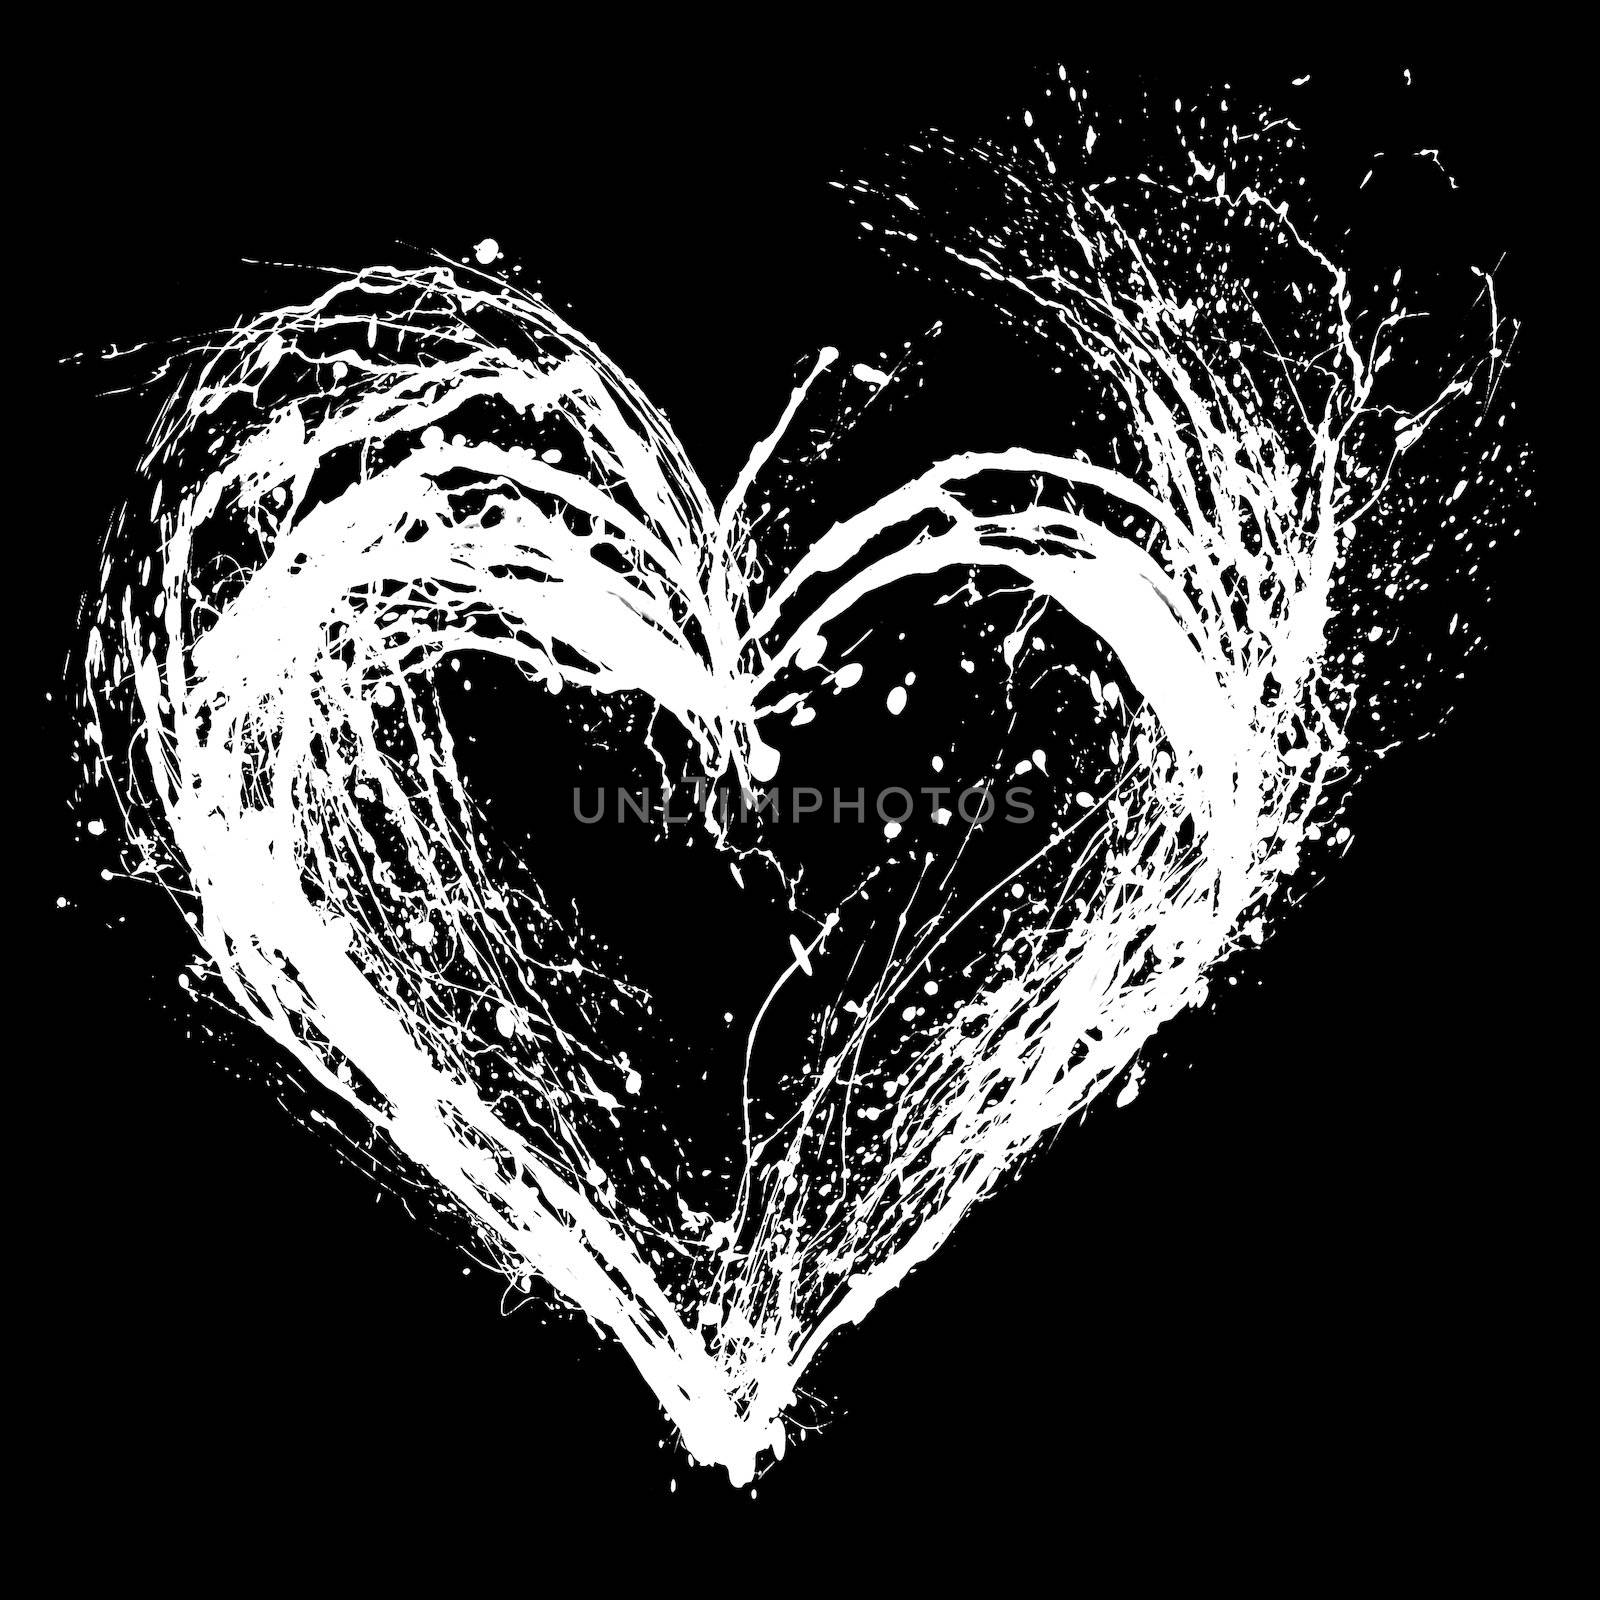 Abstract Valentine black heart on black background